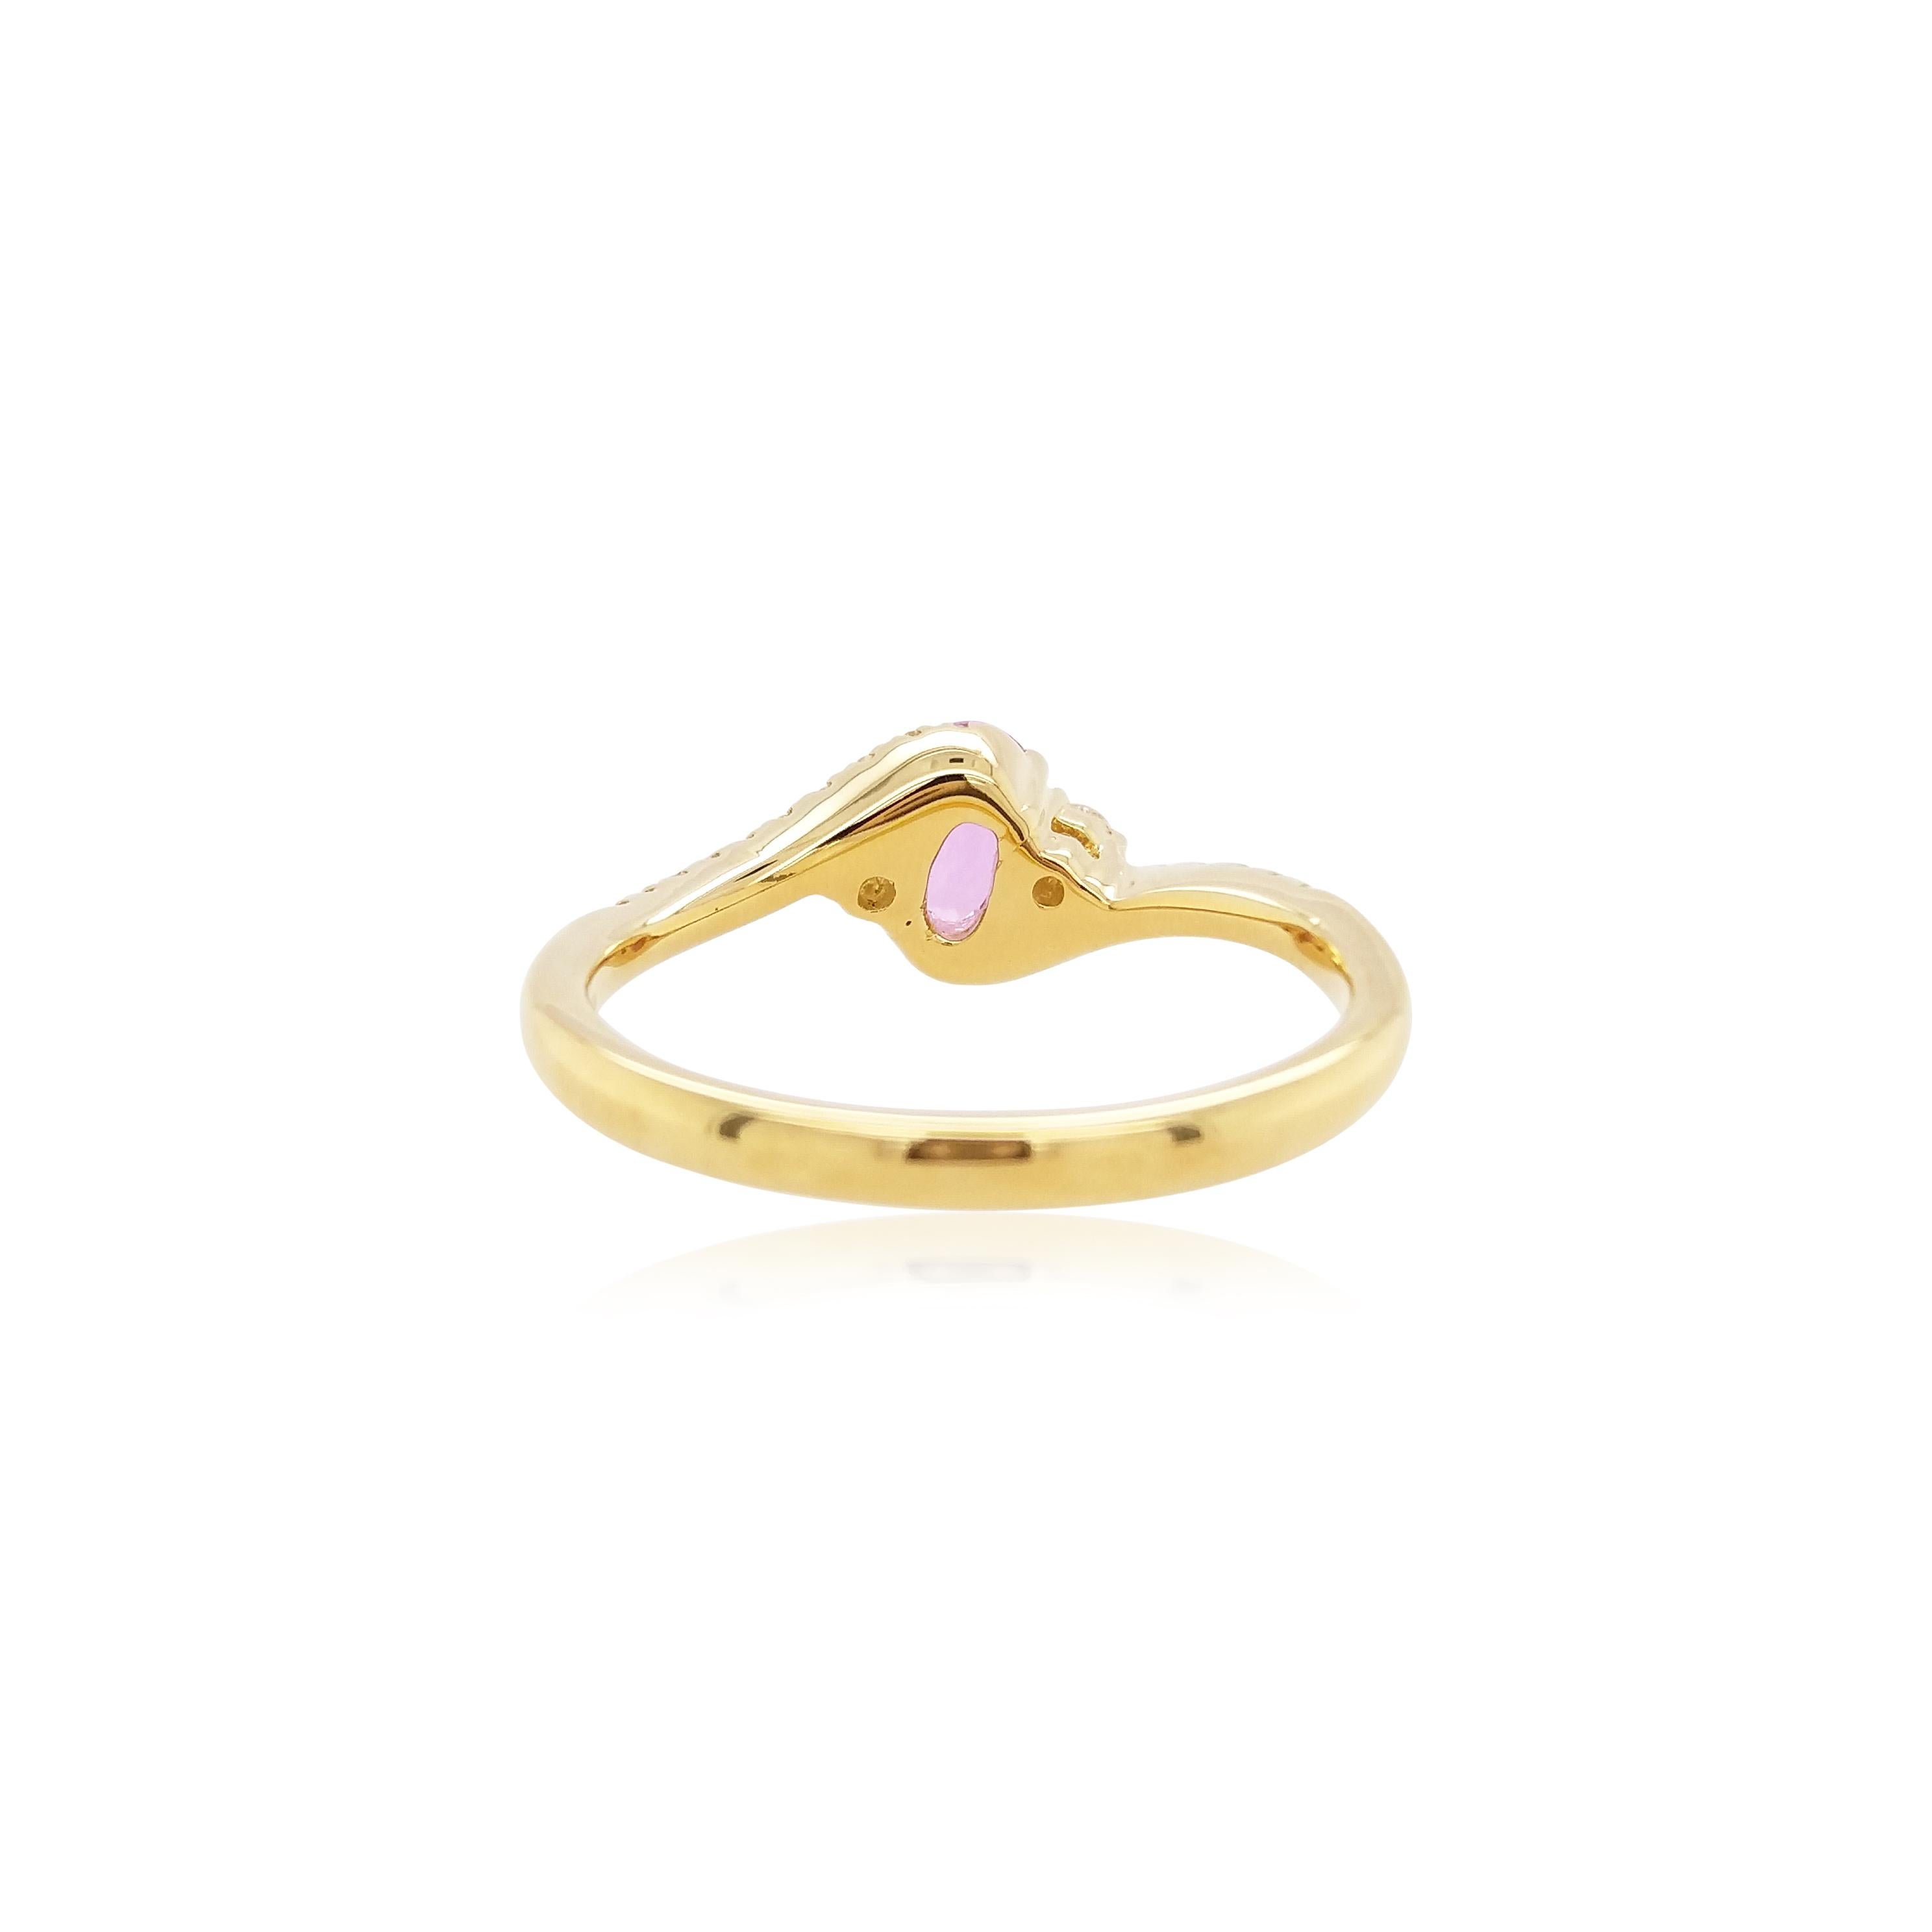 This delicate ring features a lustrous pink sapphire at the forefront of its design. The spectacular hues of the sapphire are perfectly accentuated by the 18 Karat Yellow Gold setting and elegant diamond shoulders. A versatile piece, this ring adds